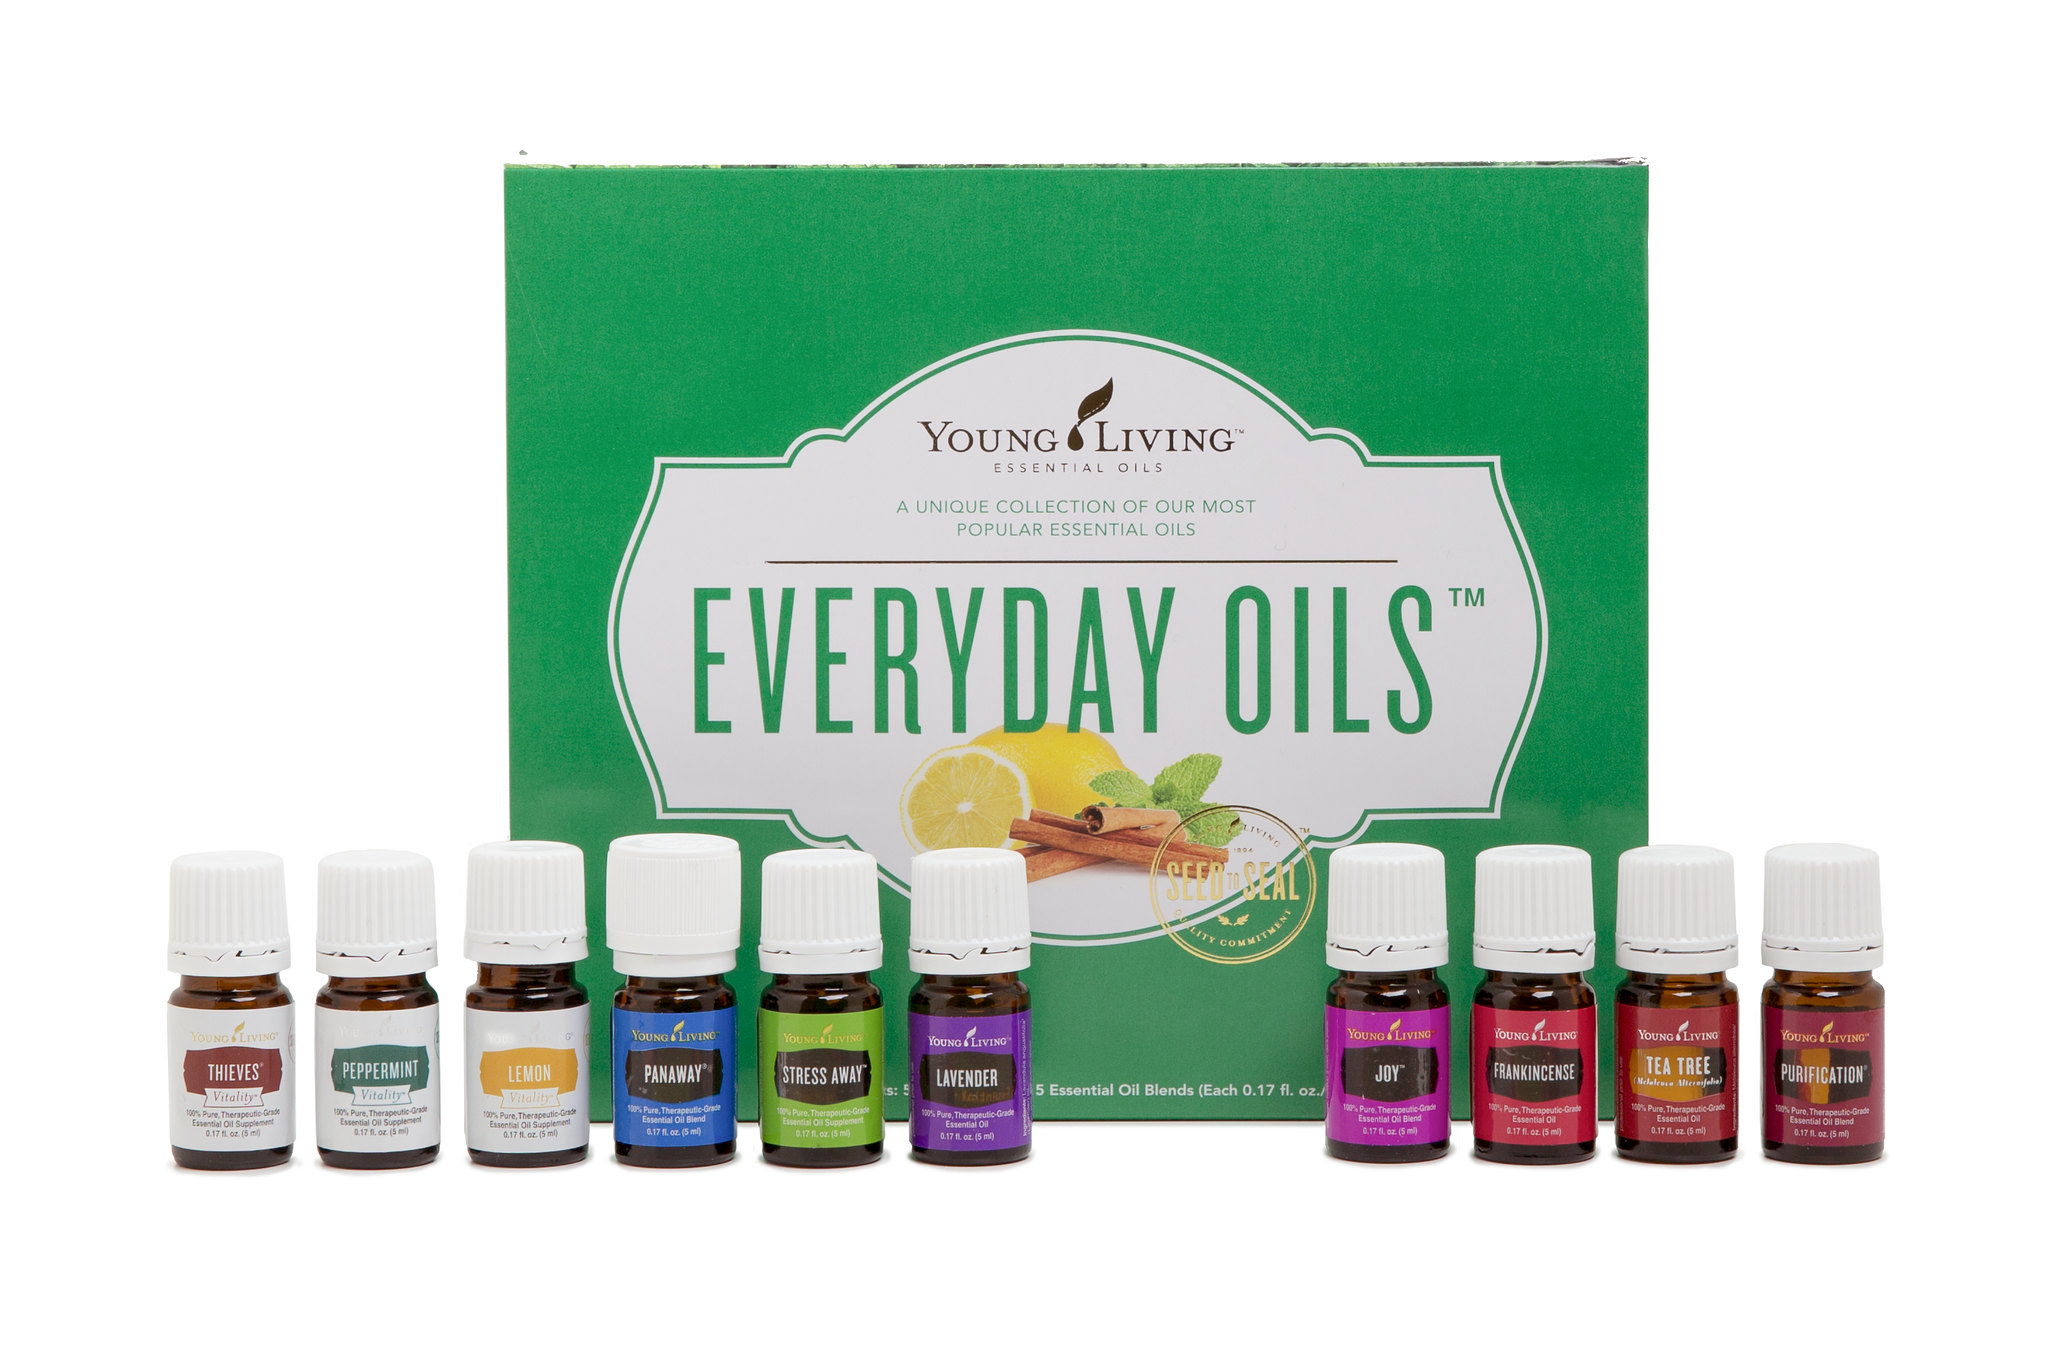 Young Living’s Everyday Oils Collection contains the essential oils of Thieves Vitality, Peppermint Vitality, Lemon Vitality, PanAway, Stress Away, Lavender, Joy, Frankincense, Tea Tree, and Purification.